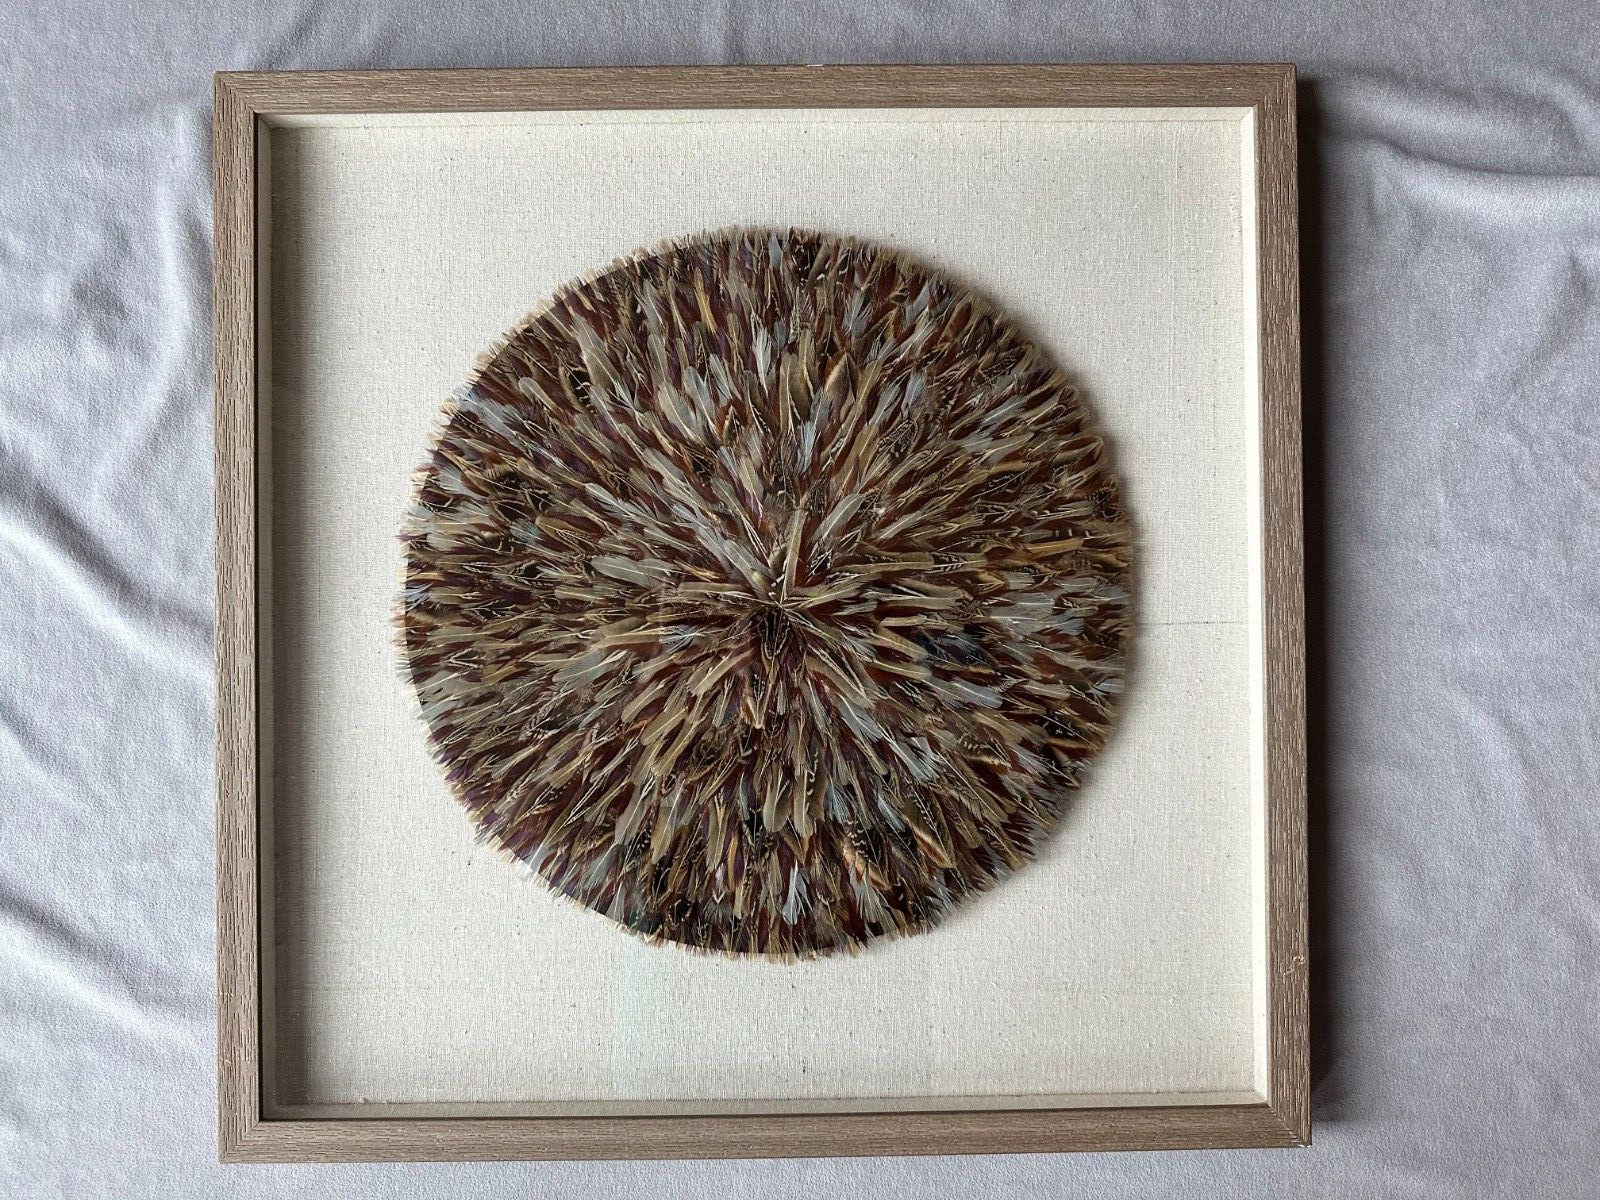 Speckled/Red/Brown/Black/White Bird Feathers Wreath in Shadow Box